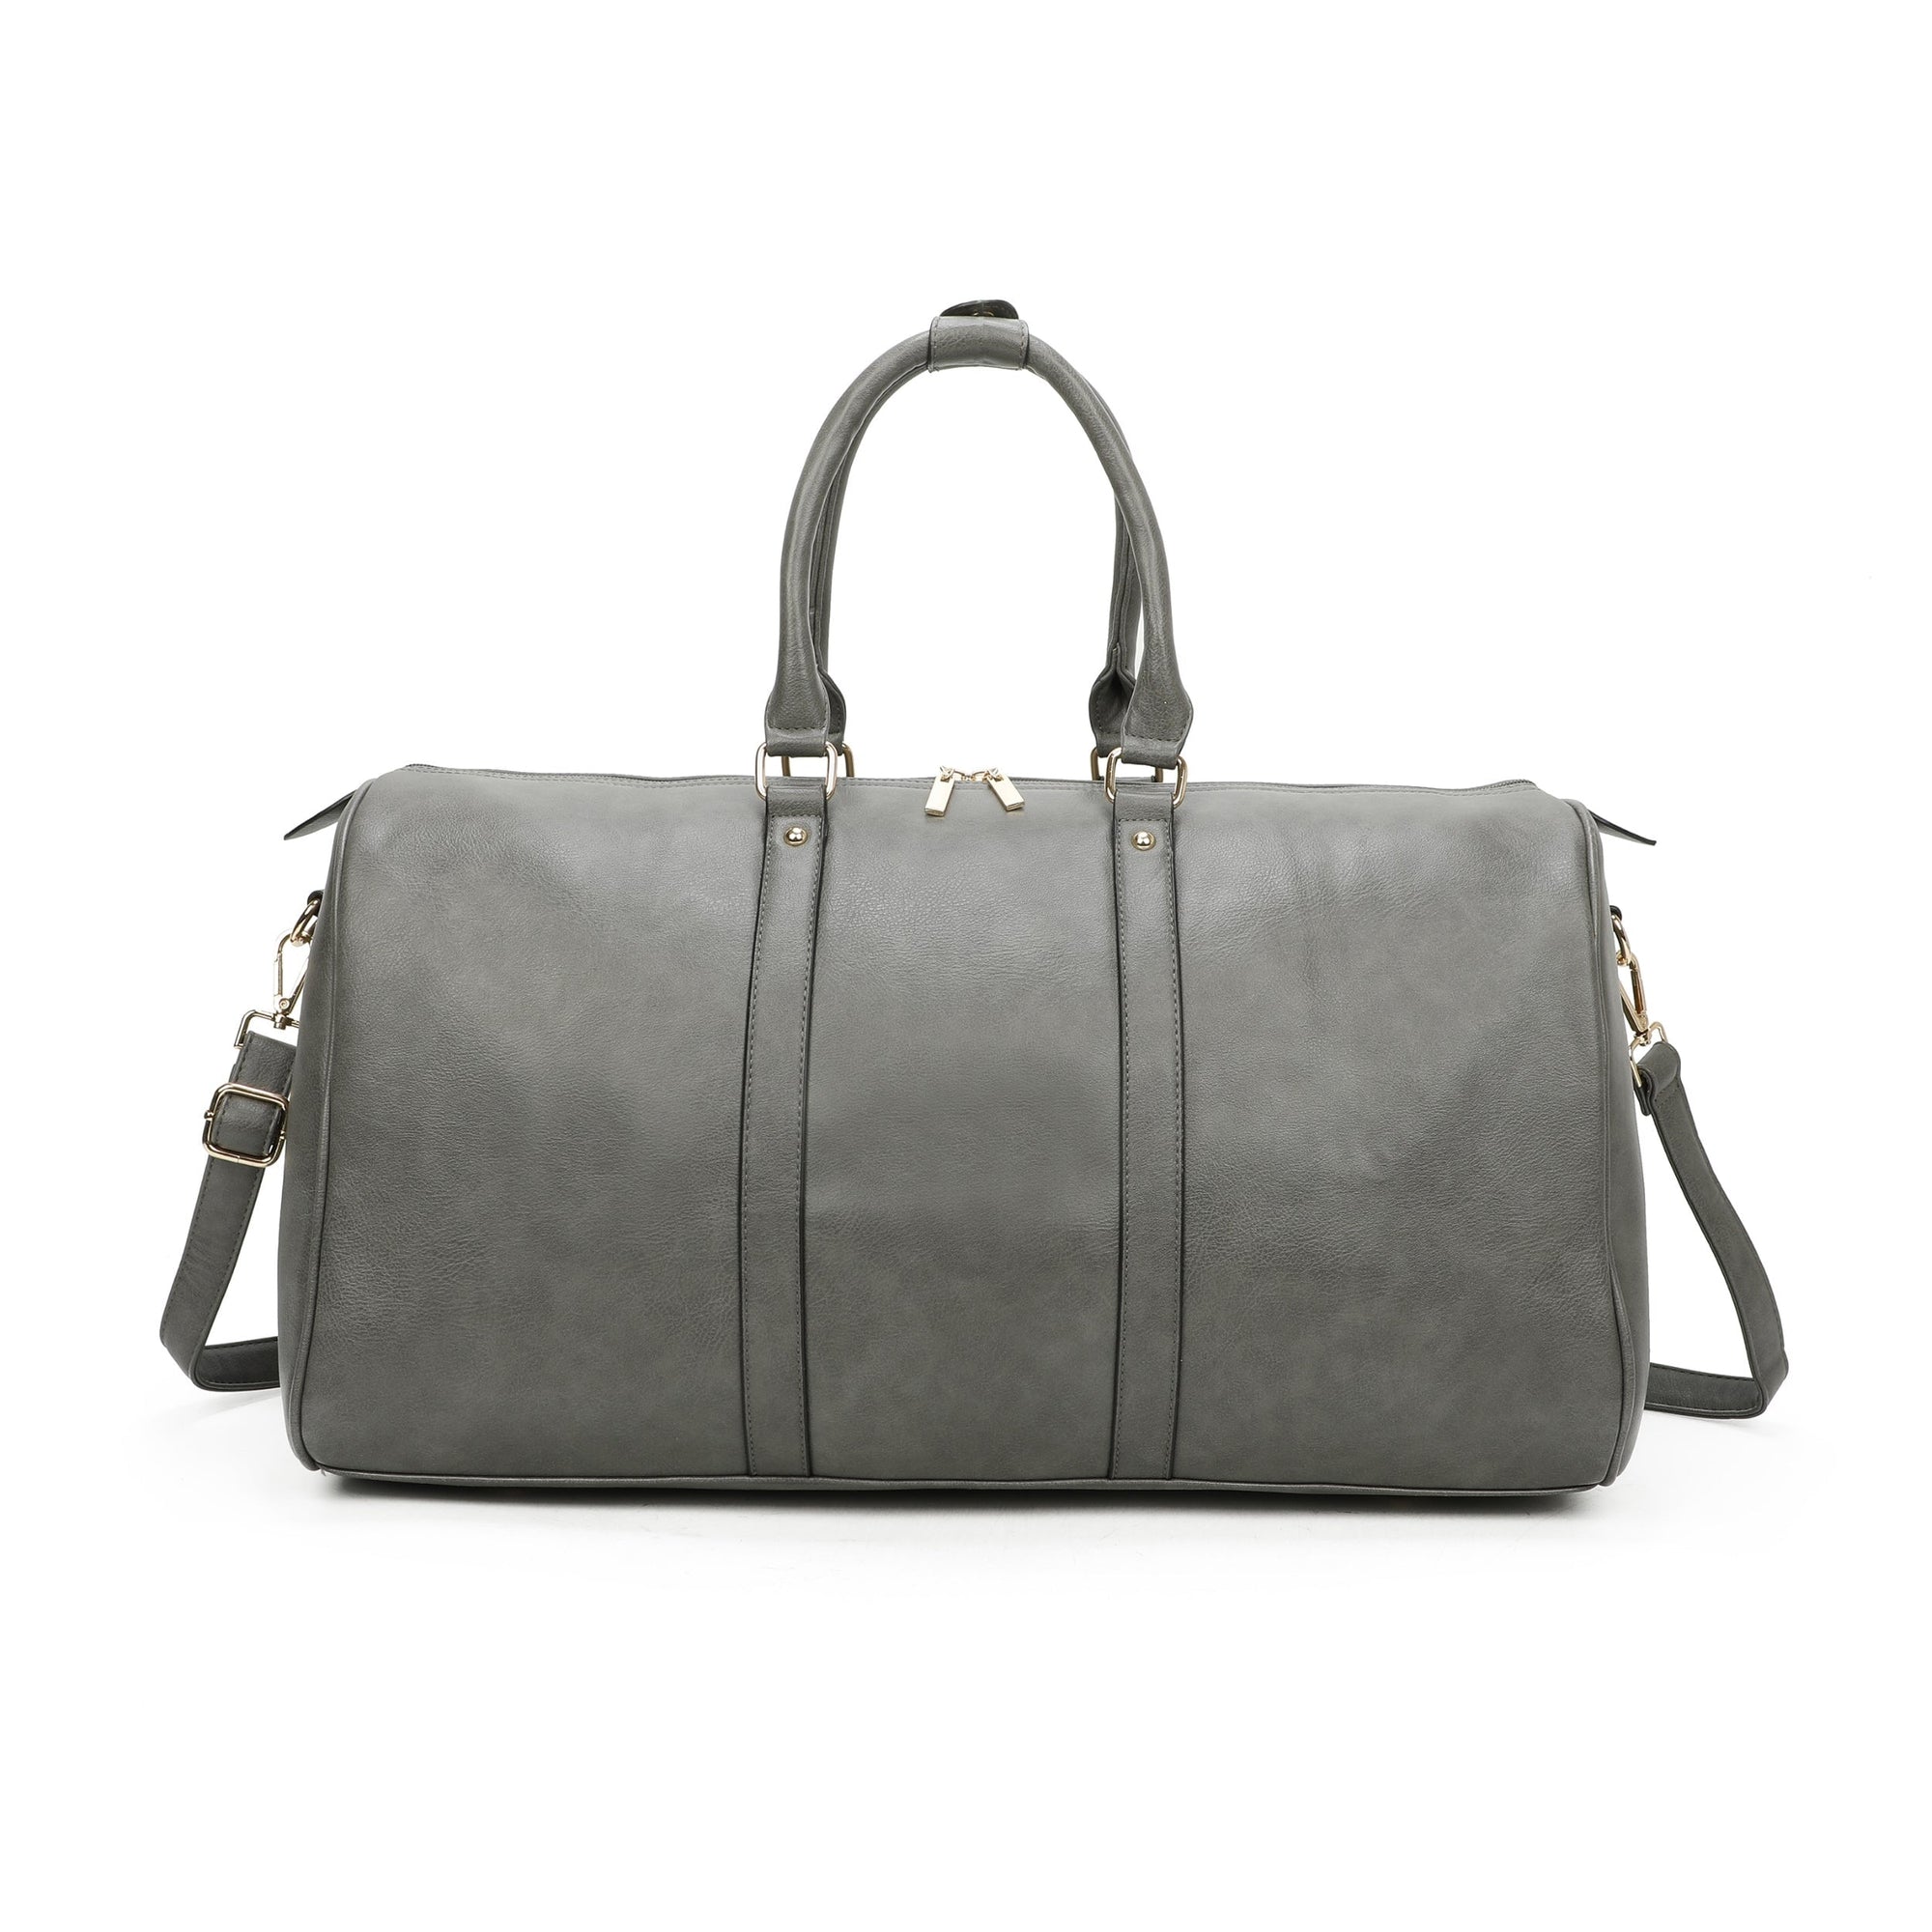 GREY FAUX LEATHER TRAVEL BAG